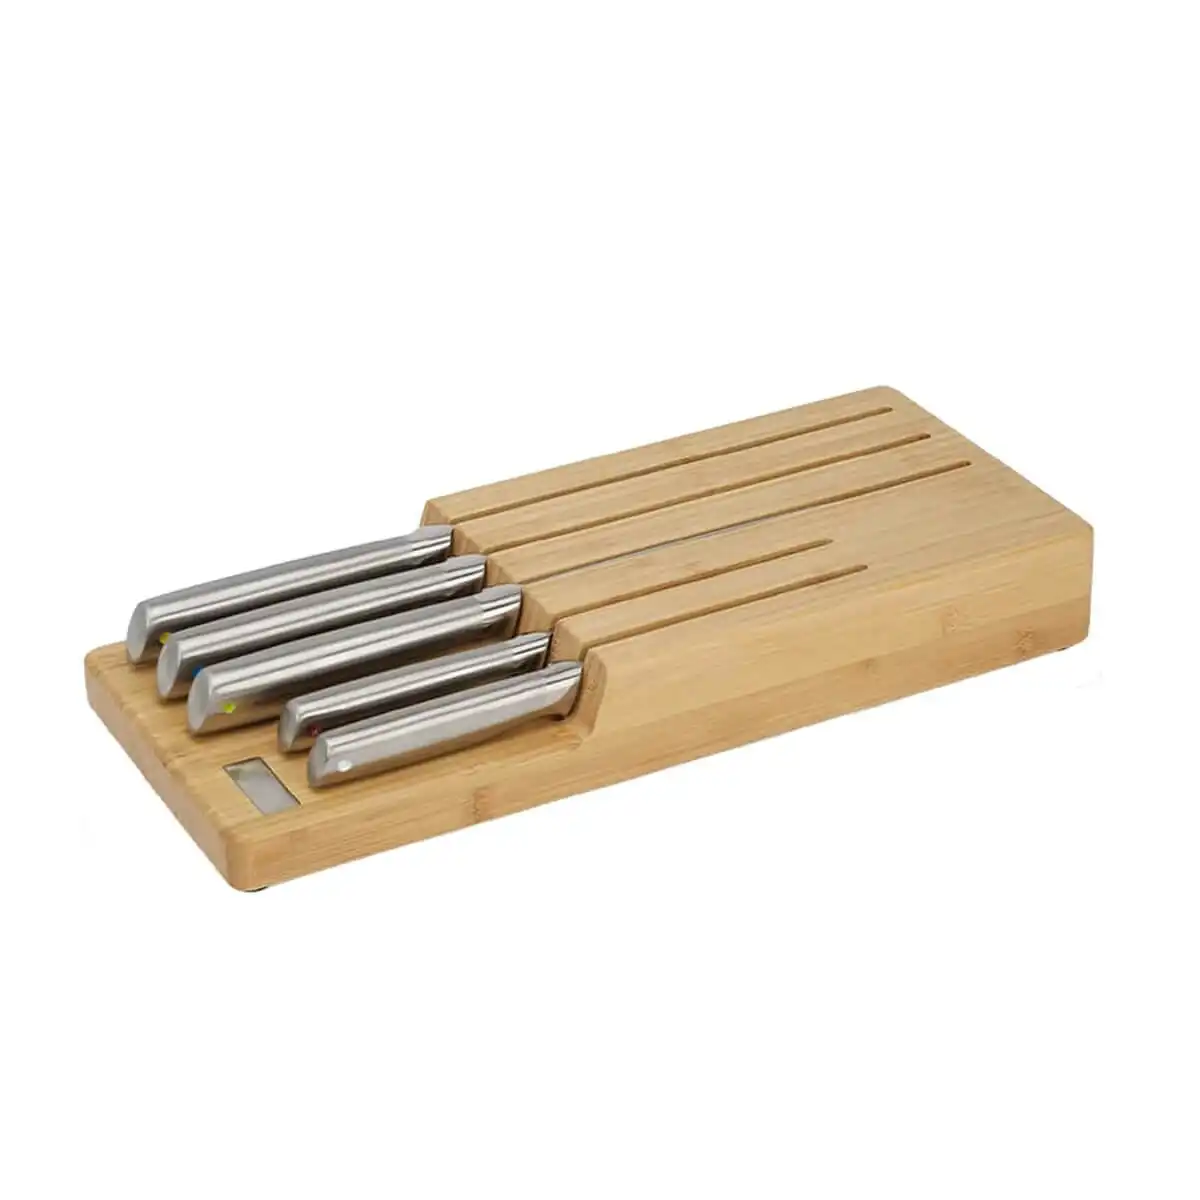 Joseph Joseph Elevate Steel Knives Bamboo Store 5-piece Knife Set with In-drawer Storage Tray